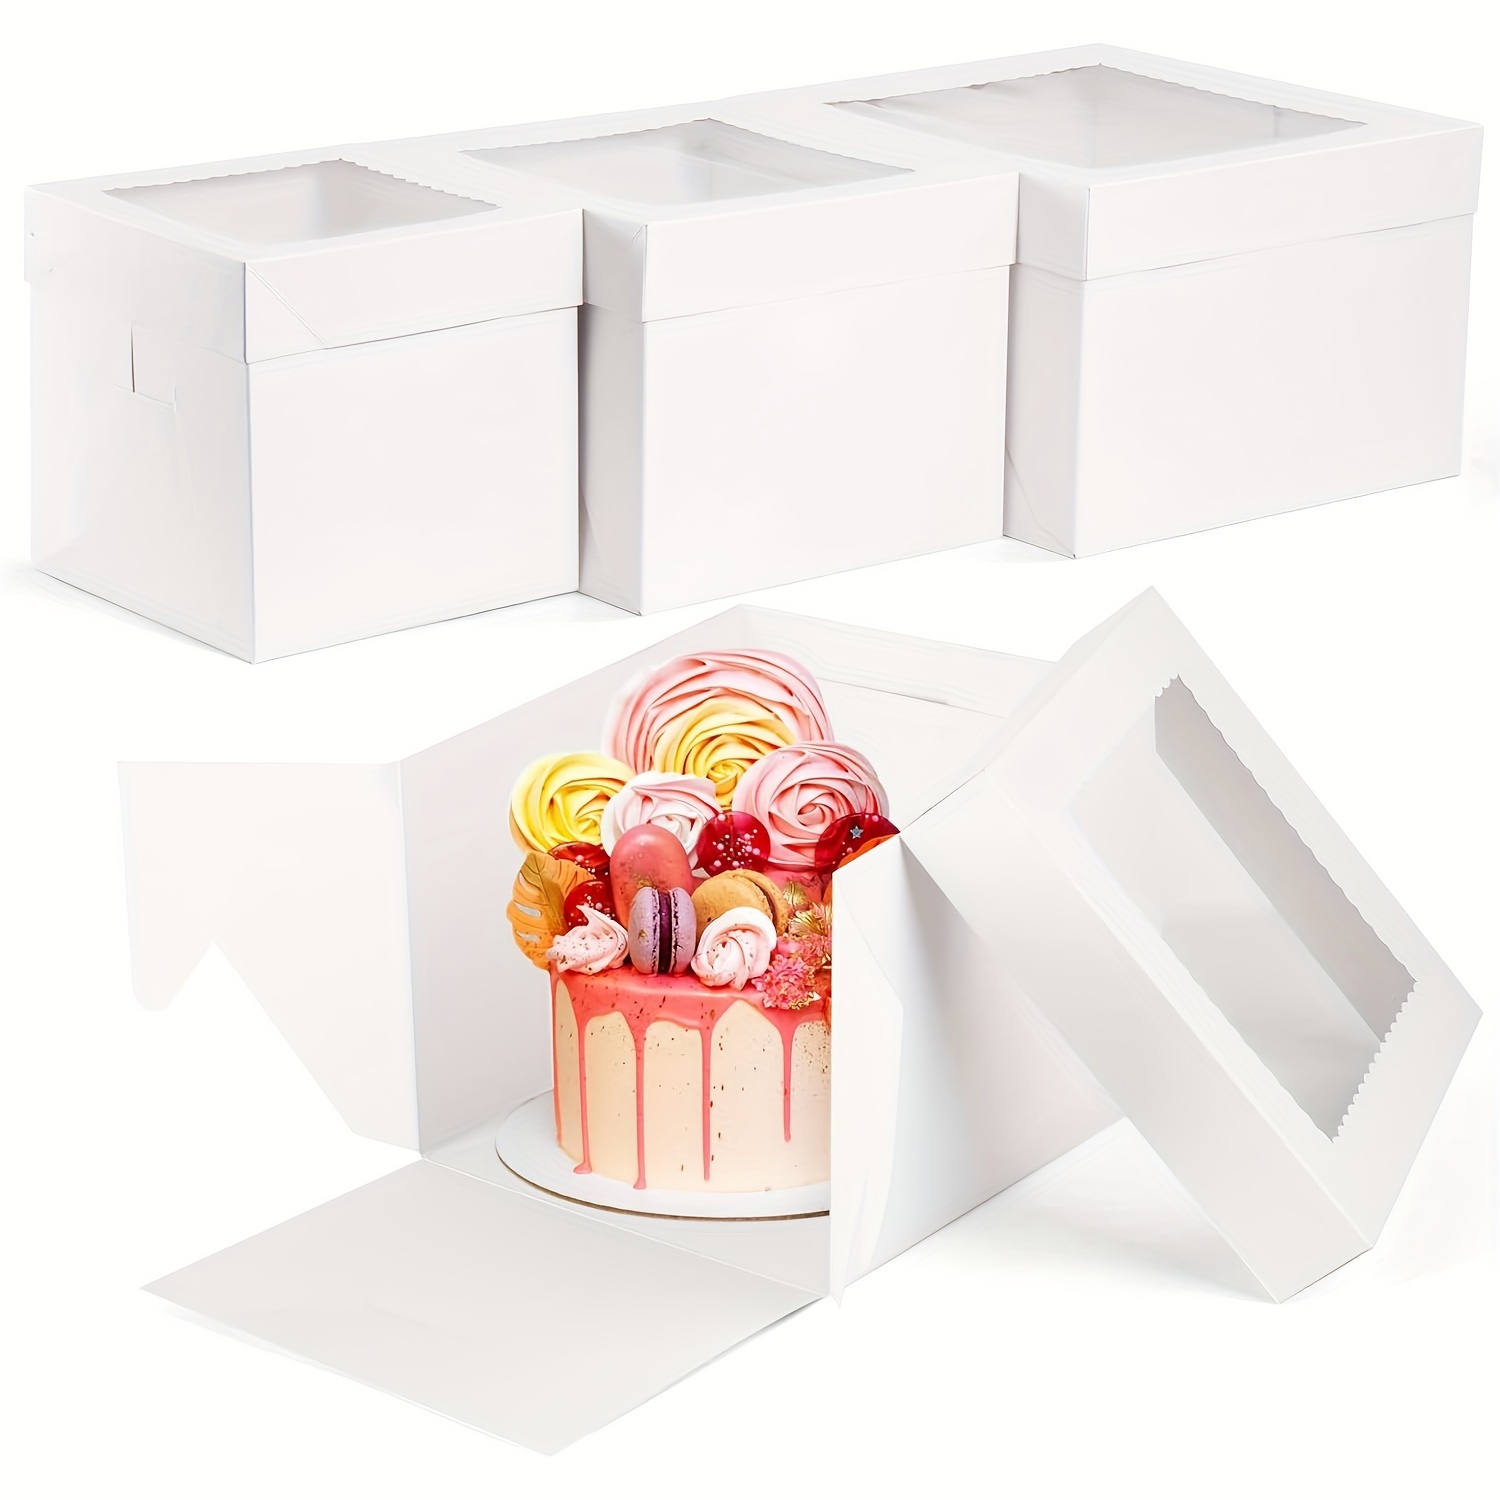 

8 Sets Cake Boxes With Boards, Multi-layer Cake Boxes Set With Window, White Bakery Boxes, Large Baking Boxes, Square Cardboard Cake Box Cake Decorating Supplies For Gift Giving